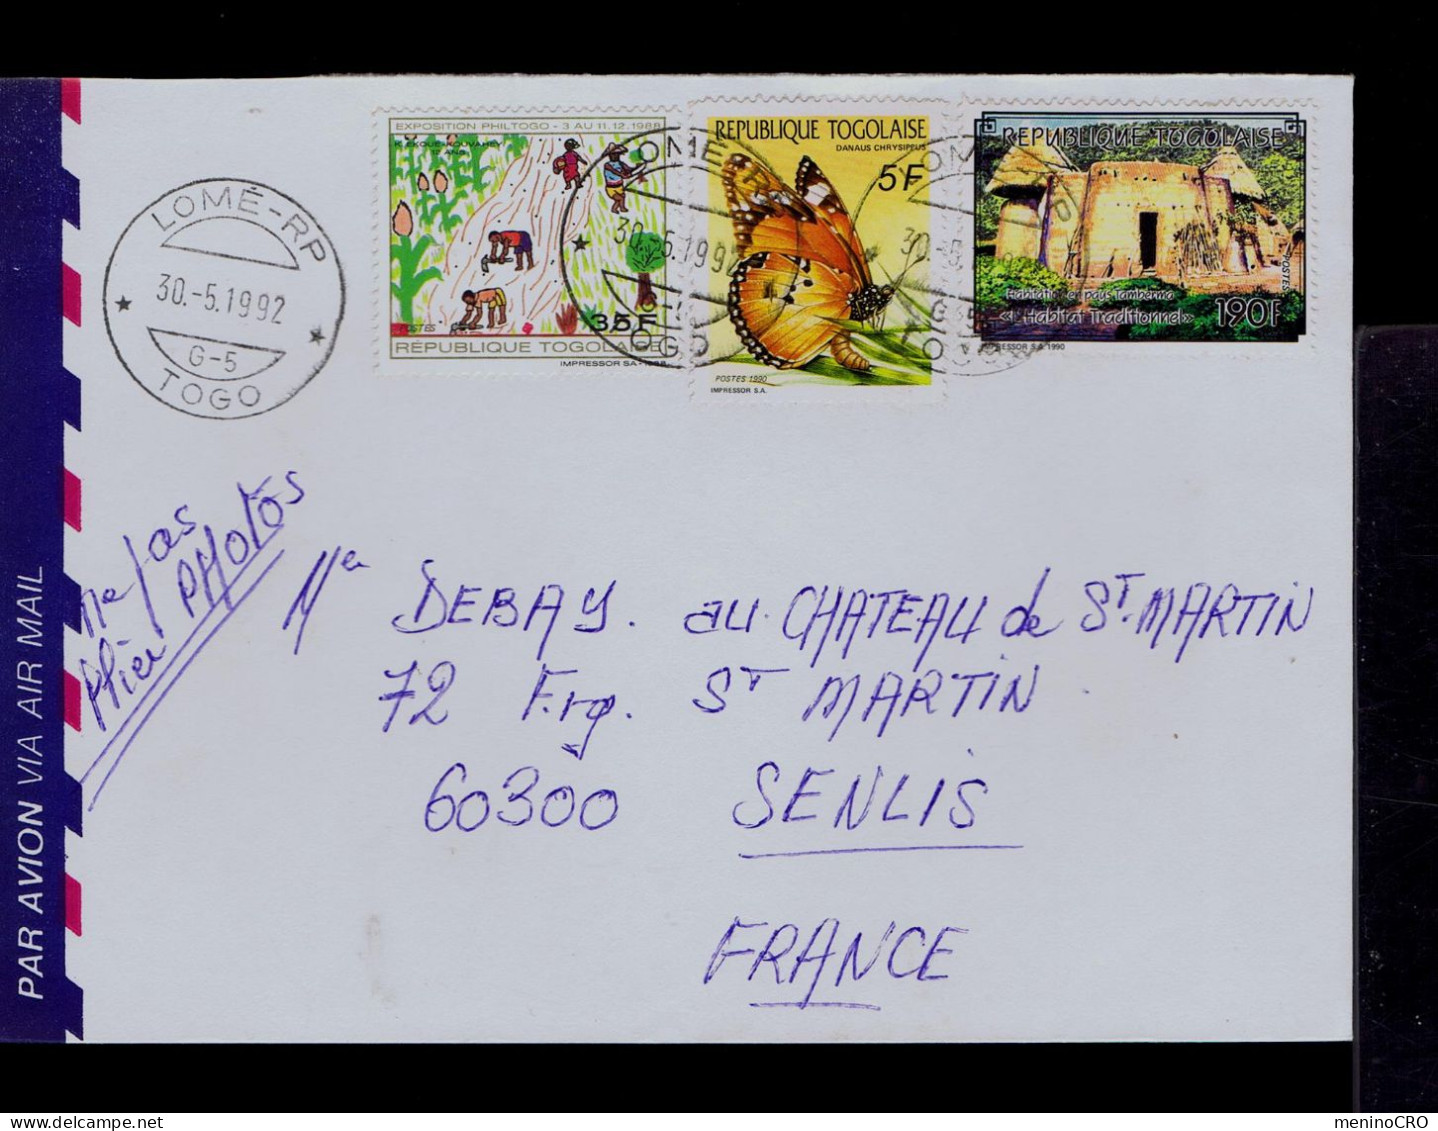 Gc8493 Rep. TOGOLAISE Butterflies Papillons Insectes Agriculture Typical Habitat Traditioneel  Mailed LOMÉ-RP »SENLIS - Agricultura